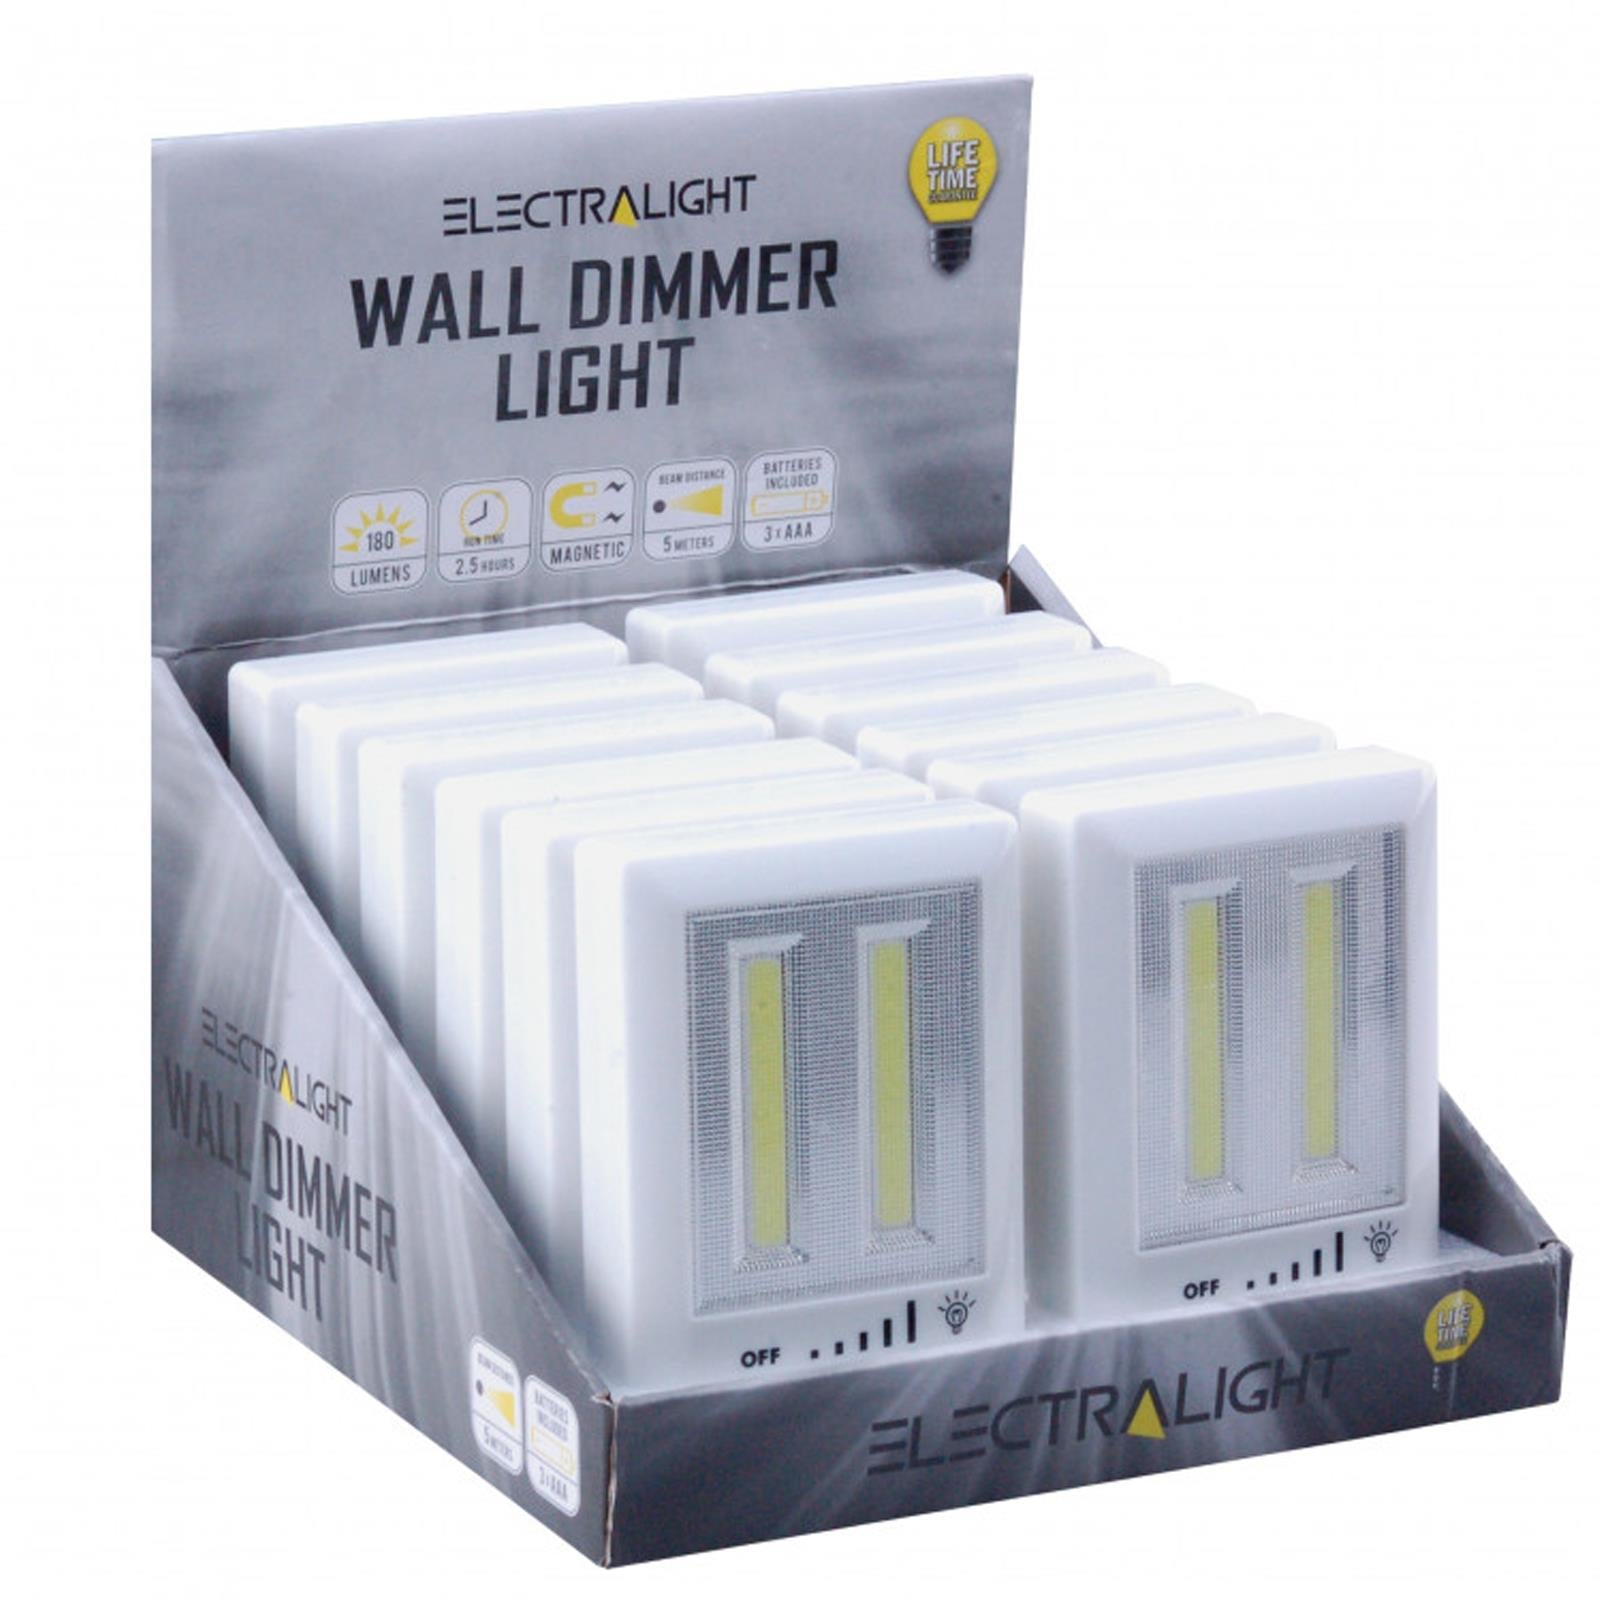 BlueSpot Electralight Wall Dimmer Light (180 Lumens) For Bathrooms Cupboards With Batteries